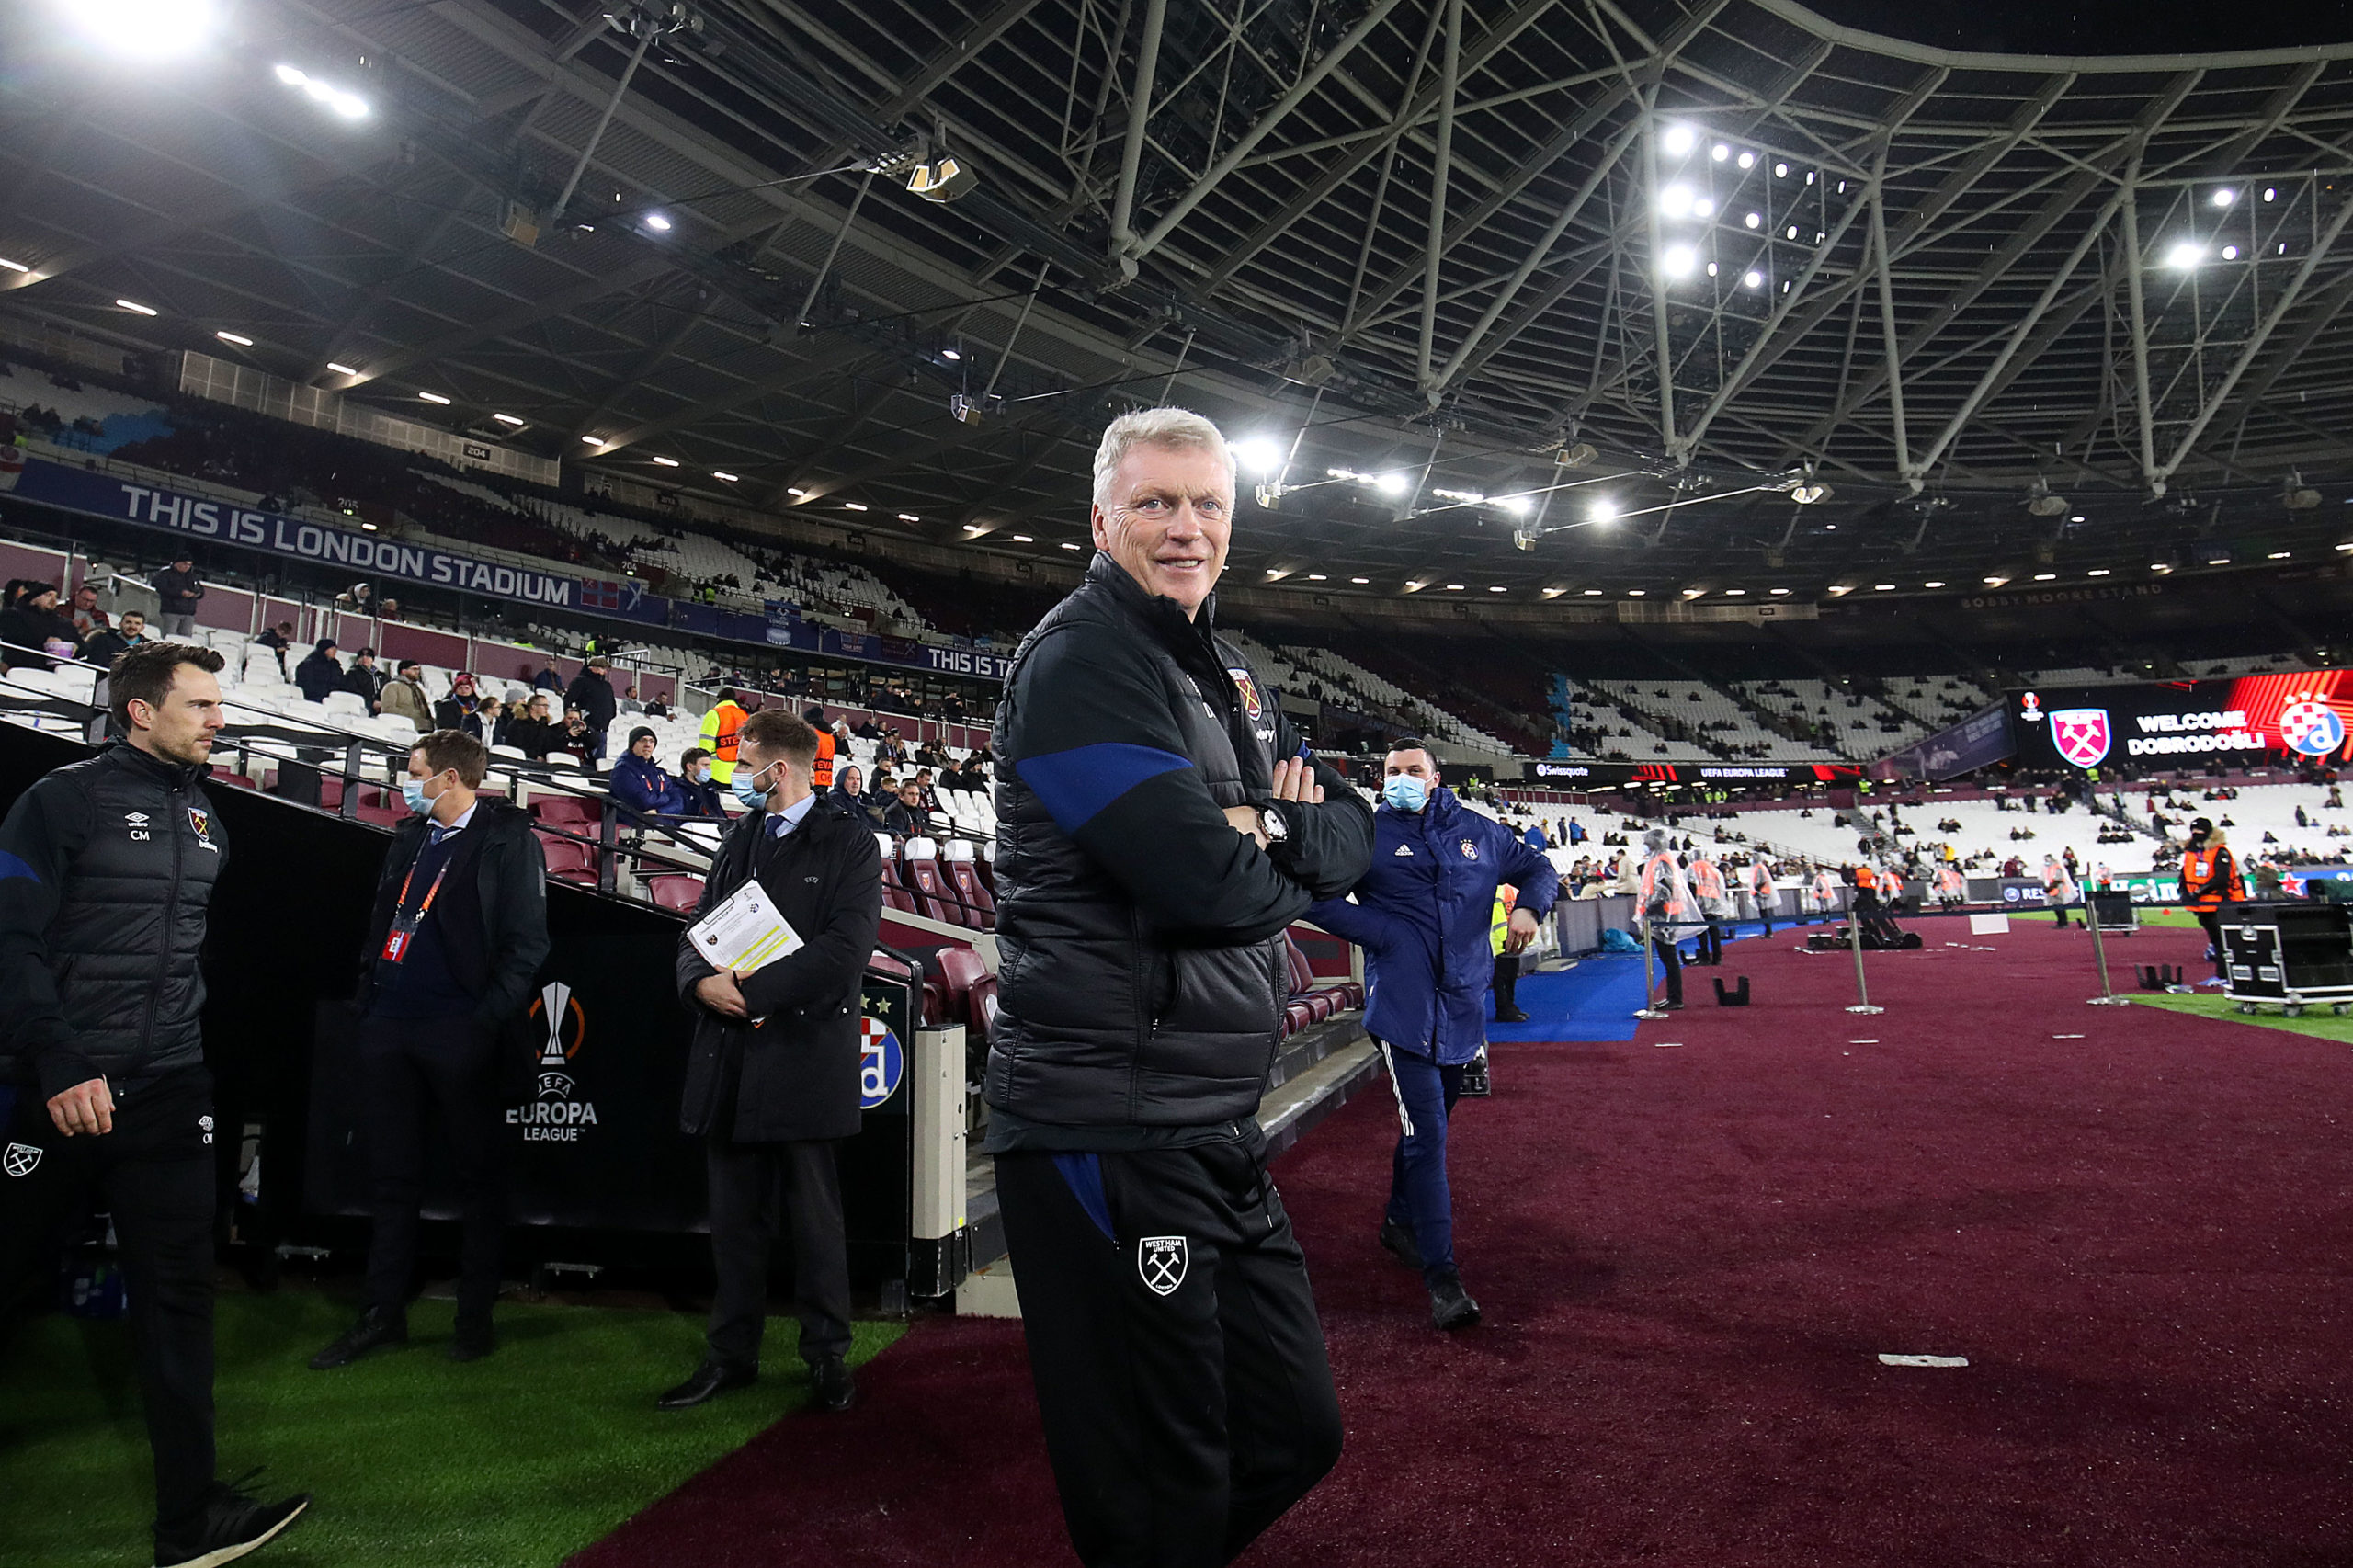 David Moyes set to pull off another masterstroke as West Ham star Said Benrahma says goodbye